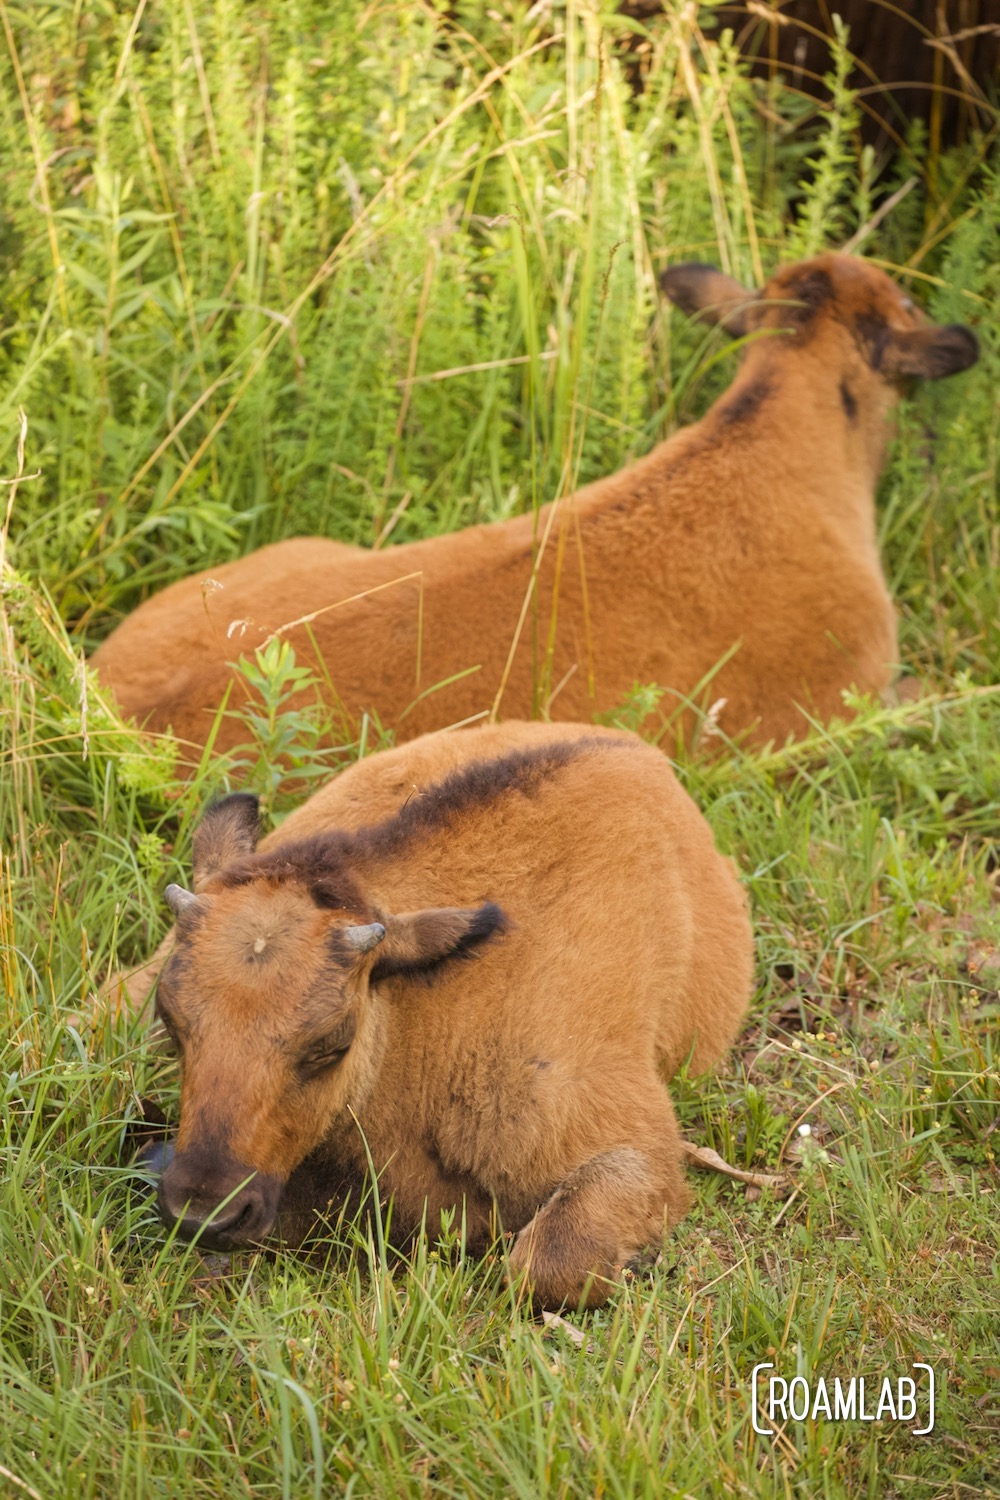 Bison calves reclining in the grass.